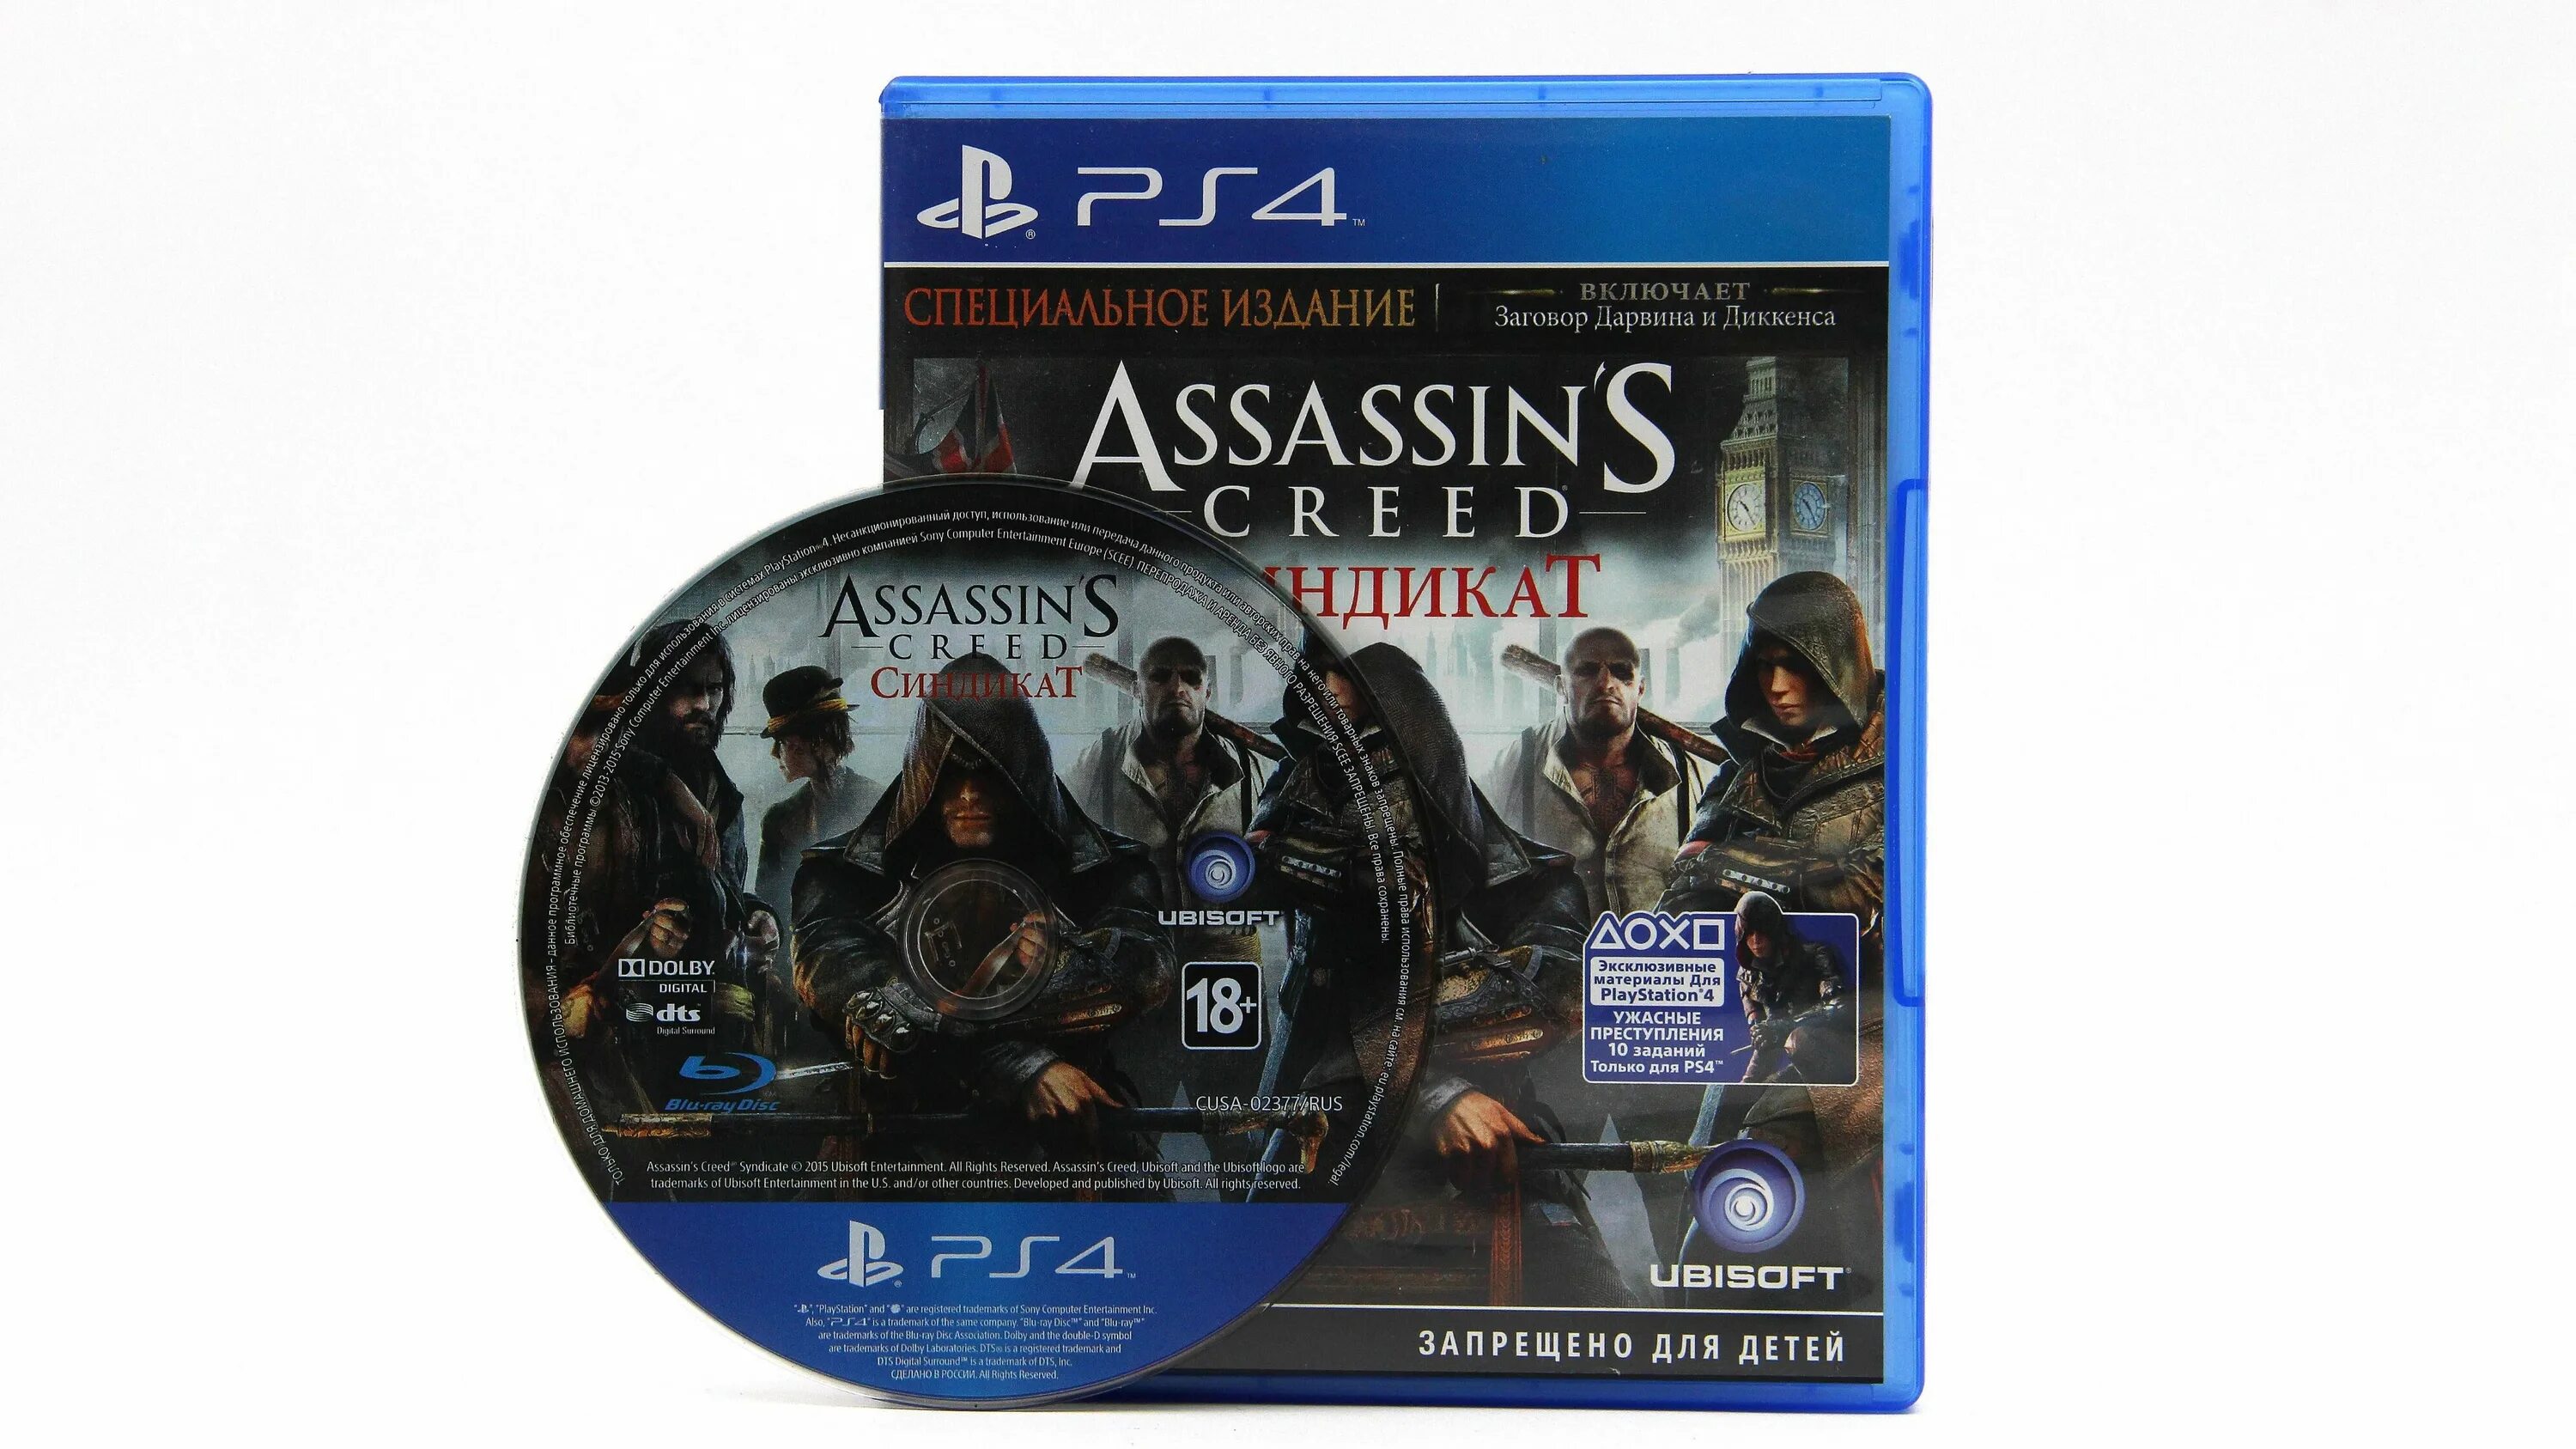 Assassin's Creed Синдикат ps4 диск. Assassin's Creed Syndicate ps4. Ассасин Крид Синдикат ps4. Ассасин Крид Синдикат на пс5.